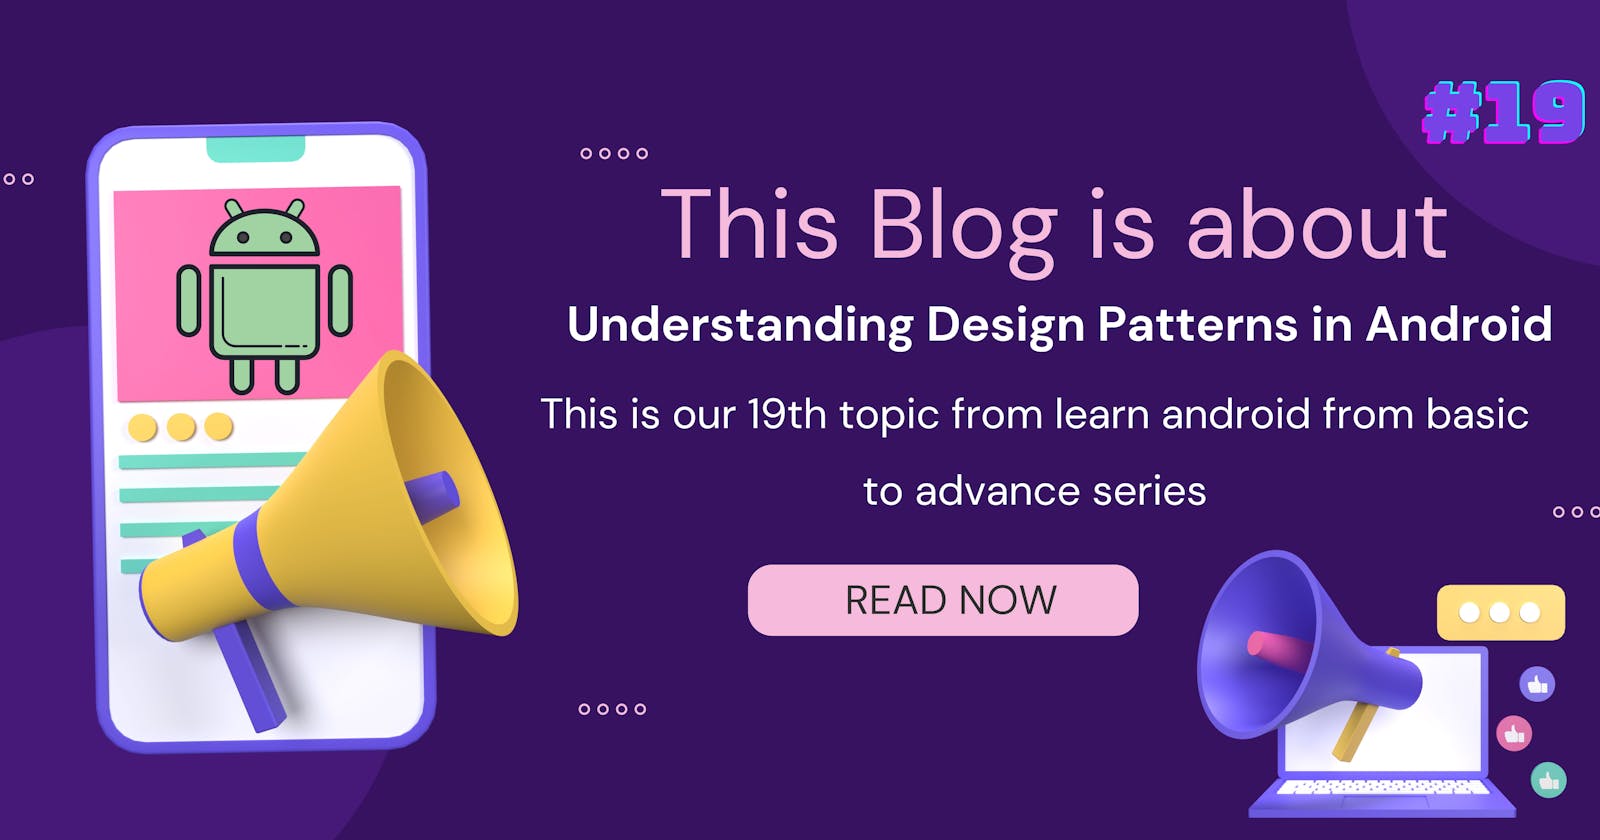 Topic: 19 Understanding Design Patterns in Android